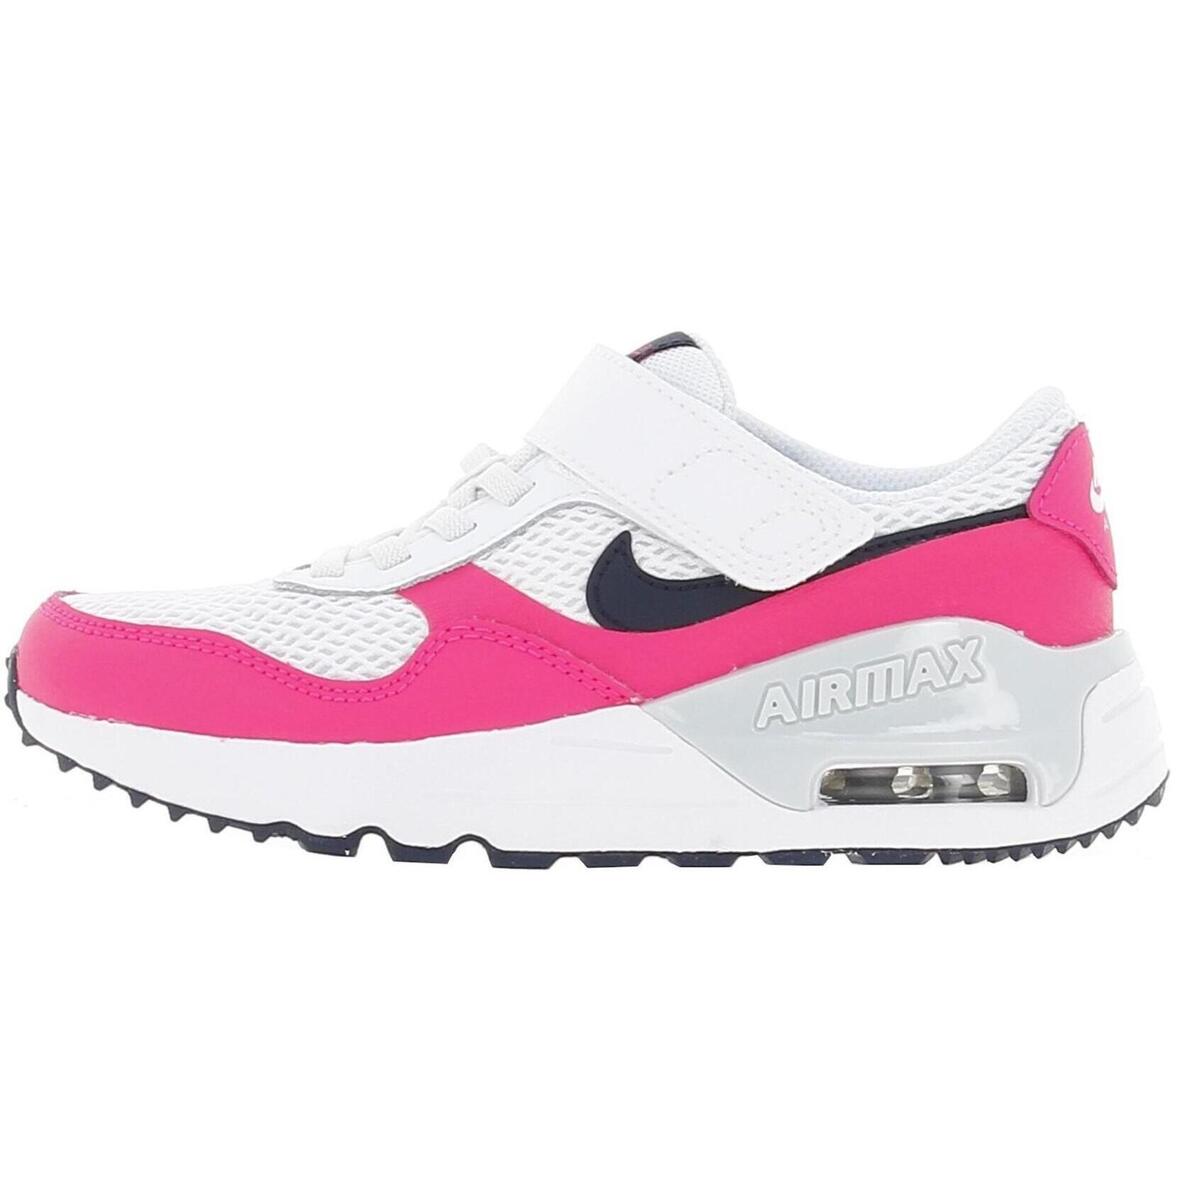 Basket Nike Air max systm  ps  26595717 1200 A